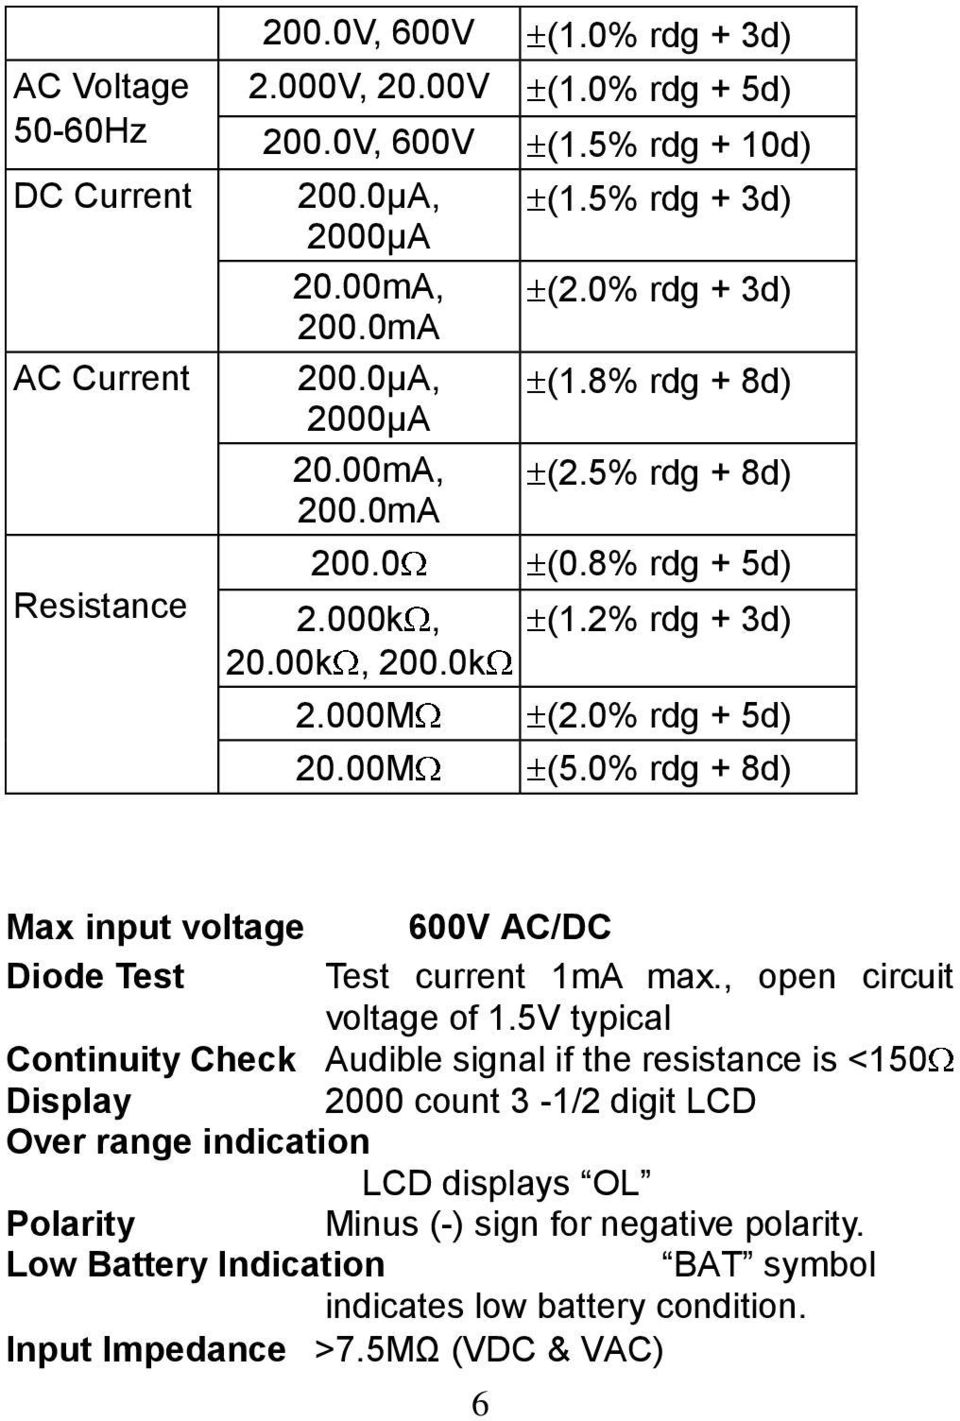 0% rdg + 8d) Max input voltage 600V AC/DC Diode Test Test current 1mA max., open circuit voltage of 1.